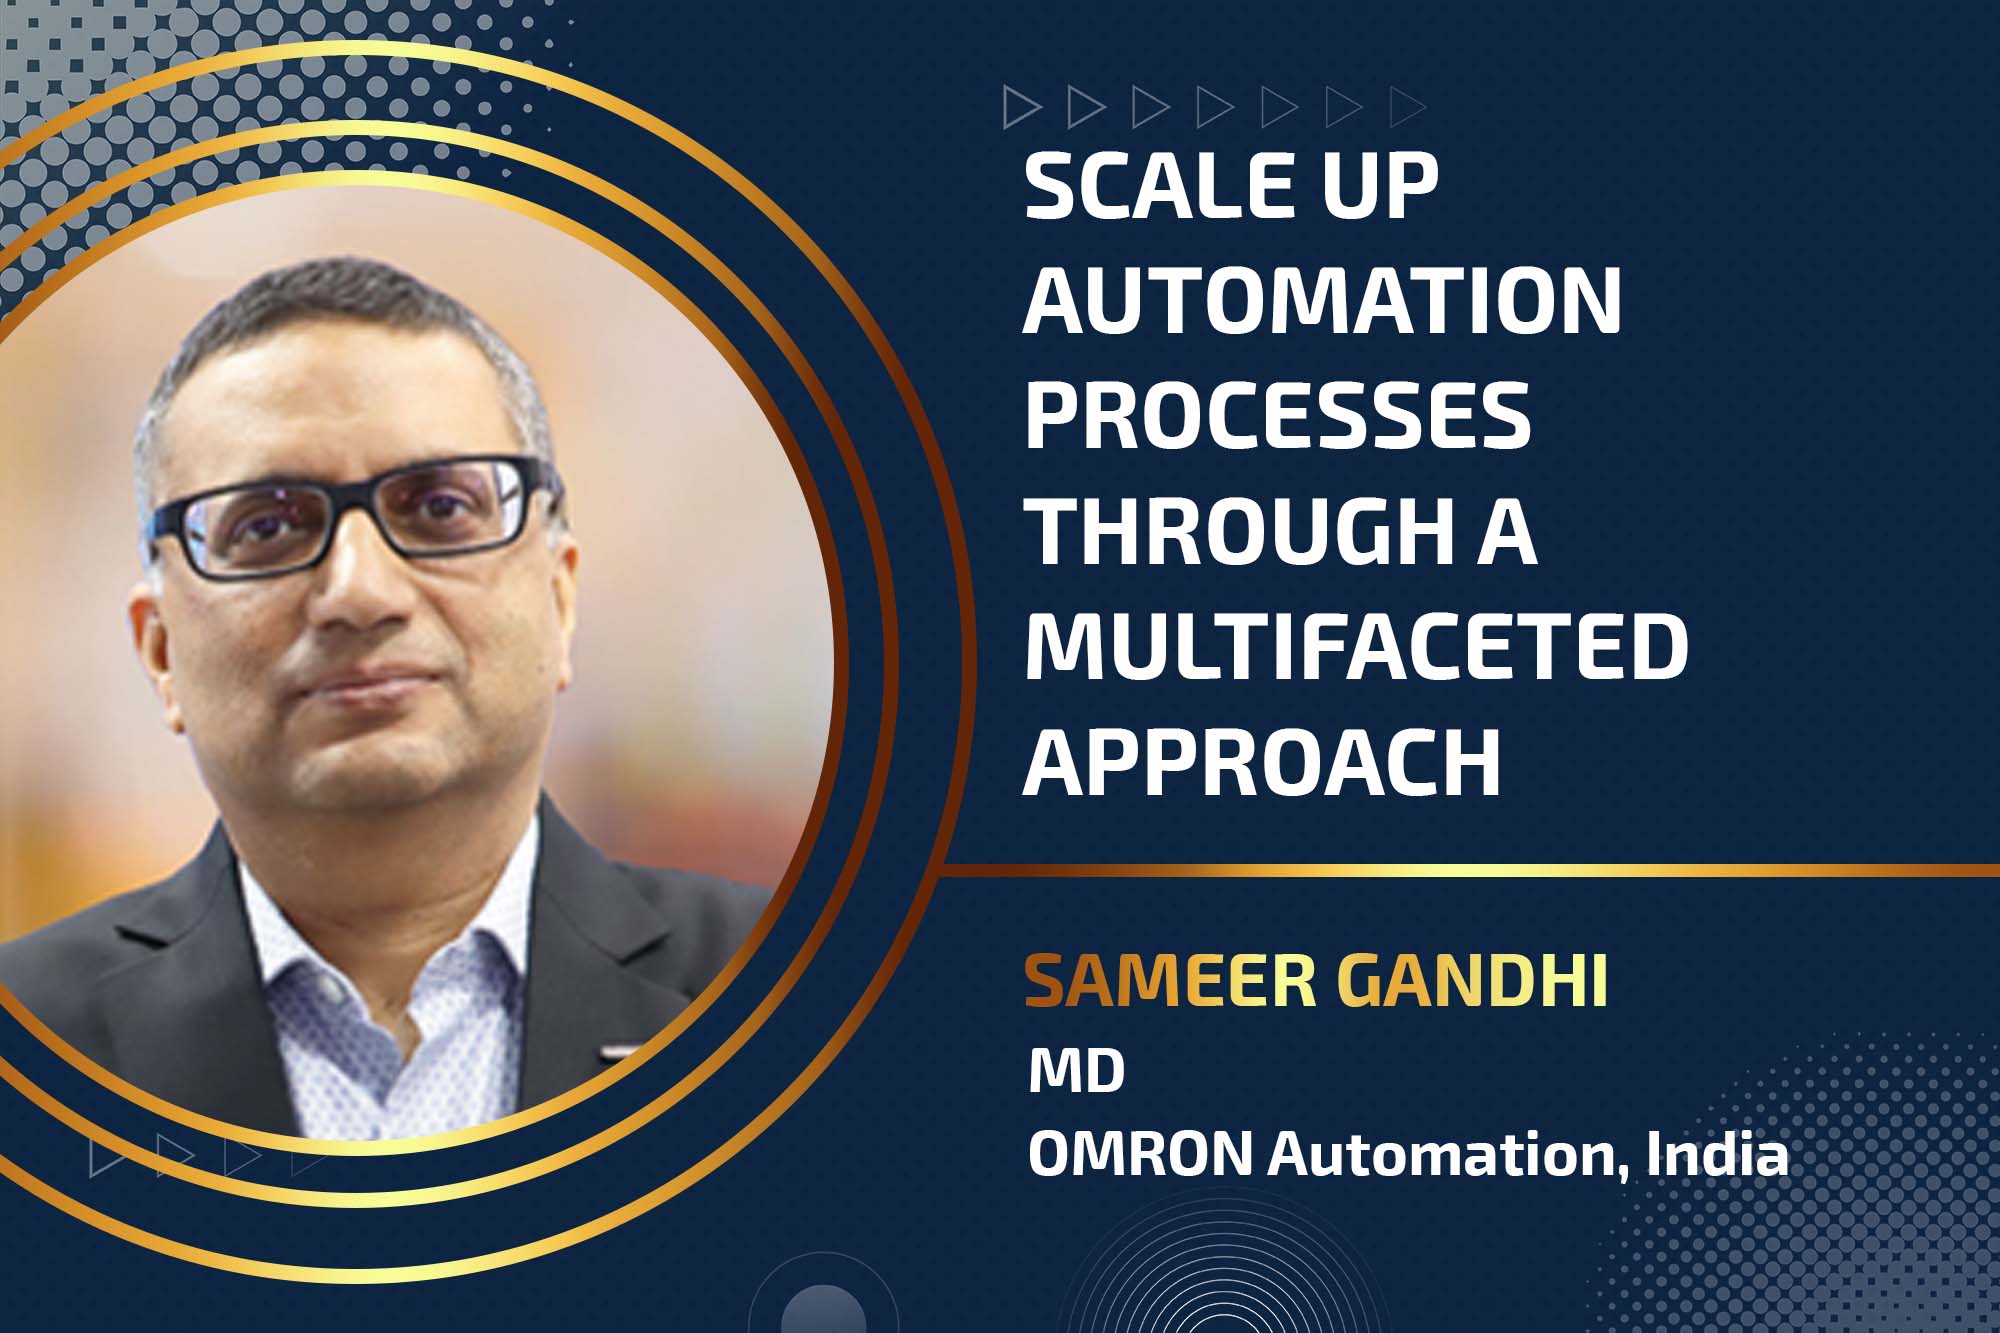 Scale up automation processes through a multifaceted approach